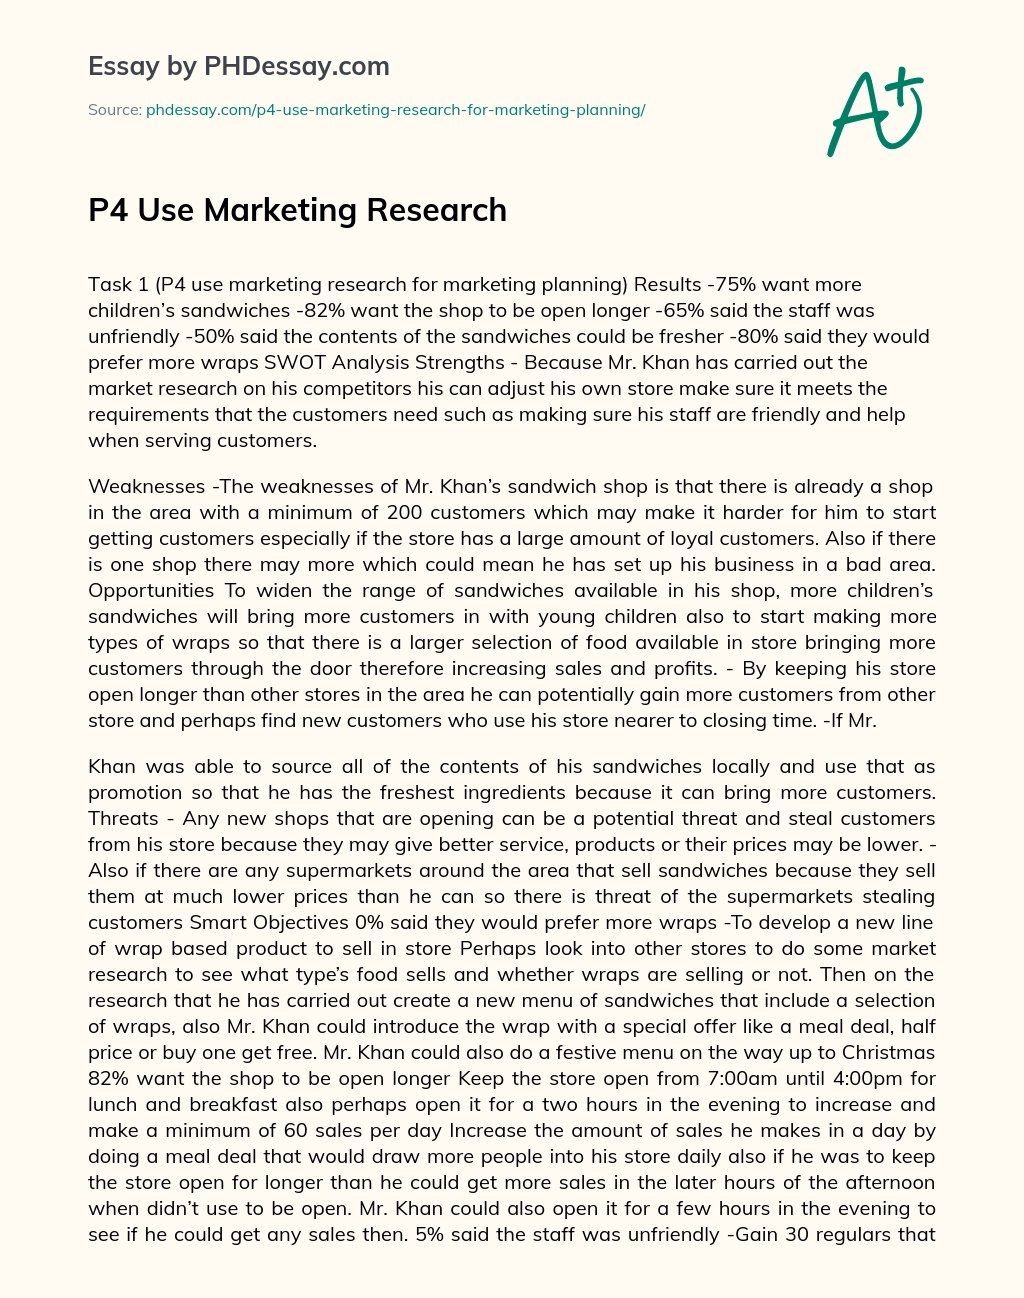 P4 Use Marketing Research essay